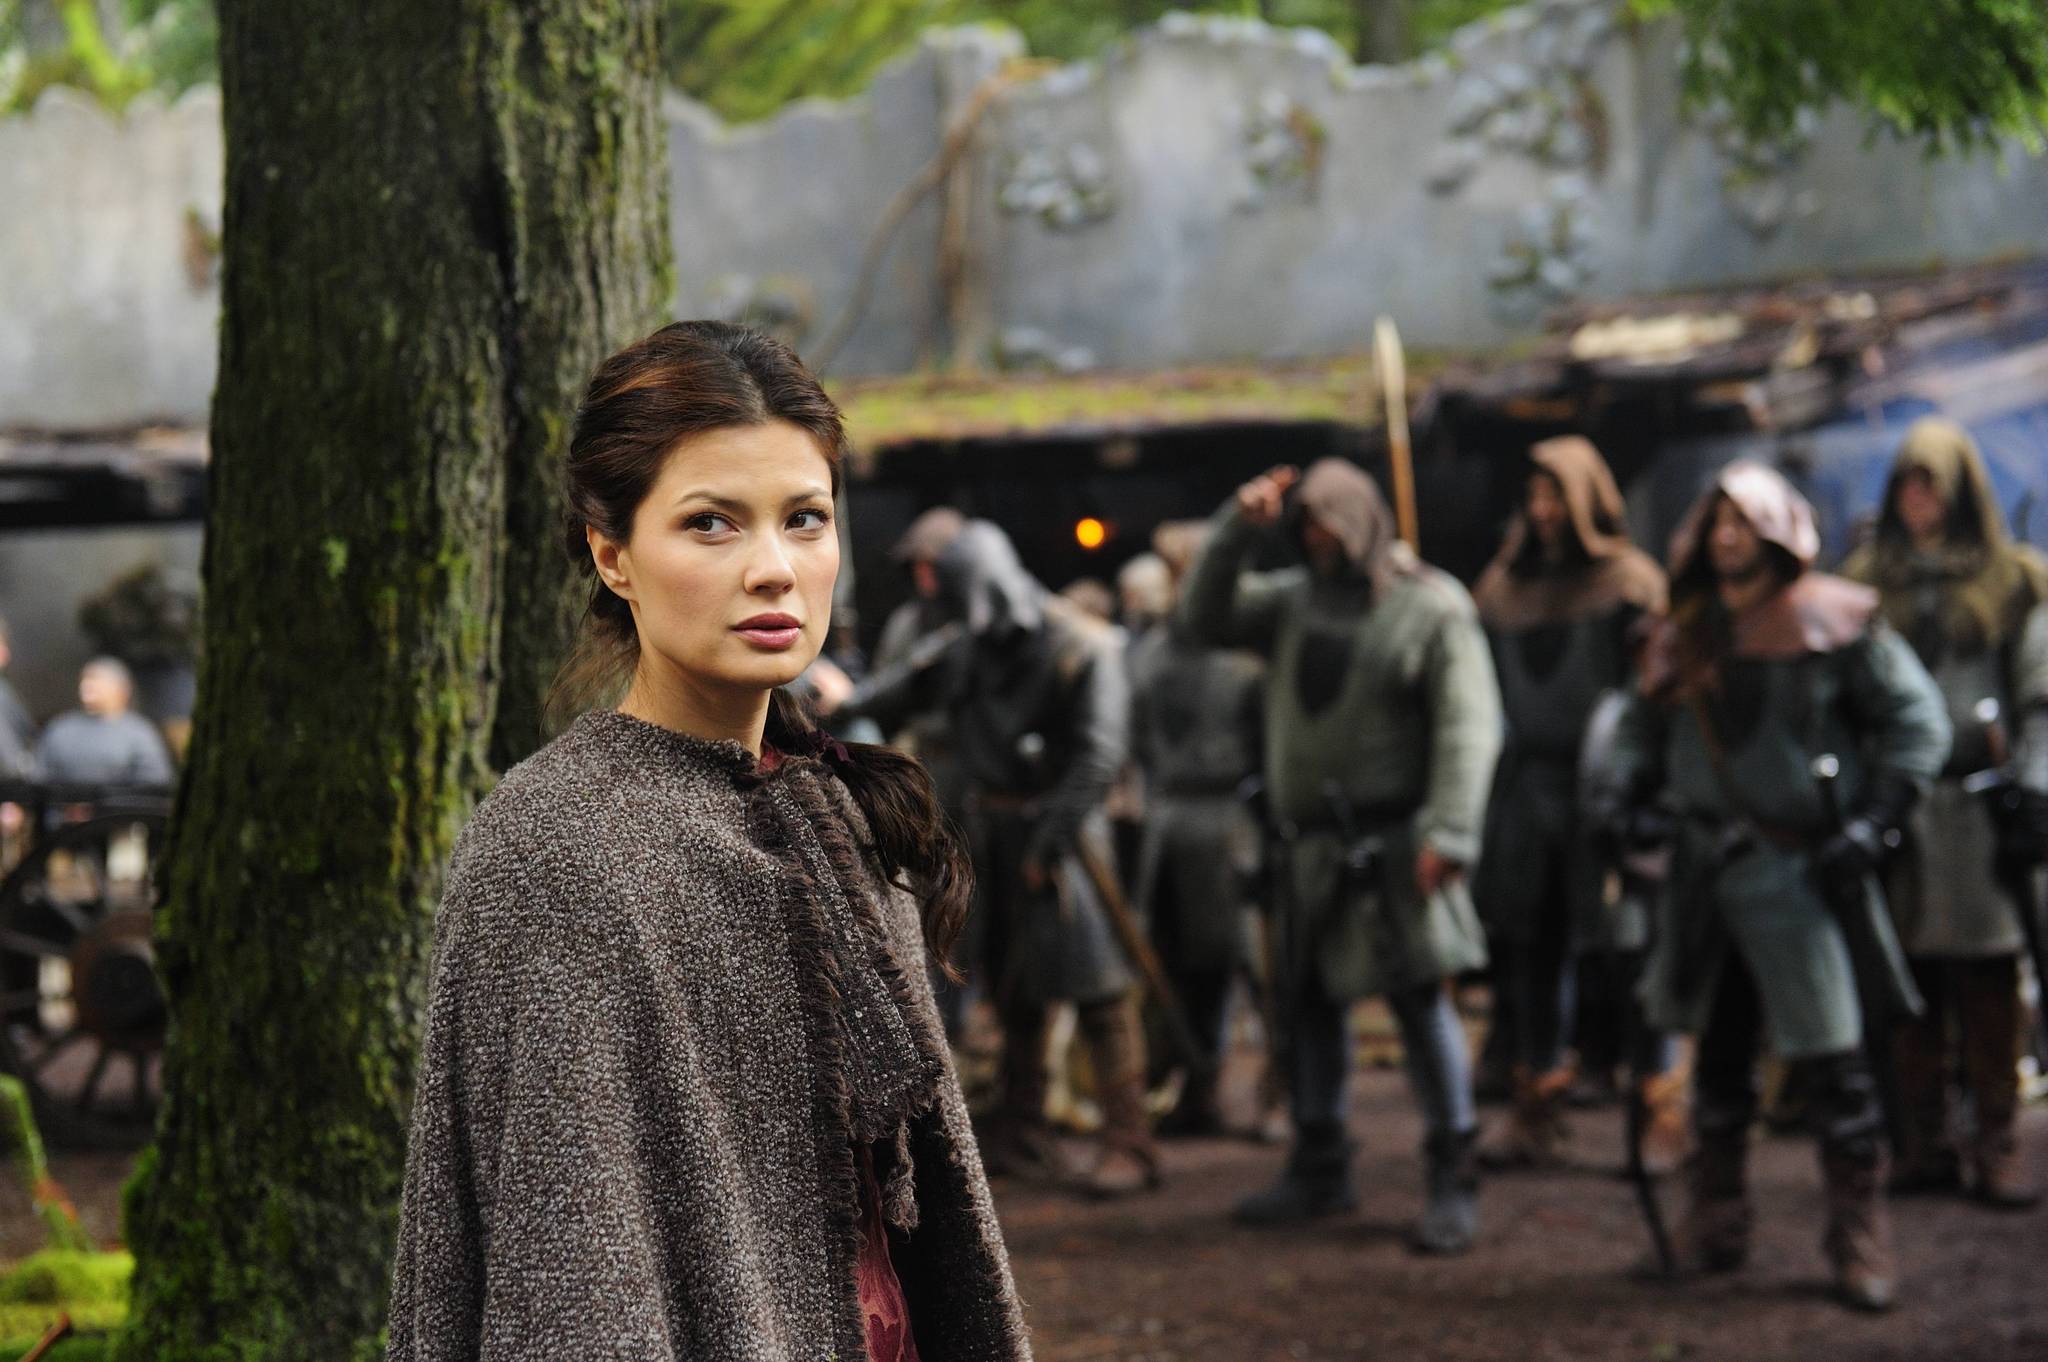 Still of Natassia Malthe in In the Name of the King 2: Two Worlds (2011)